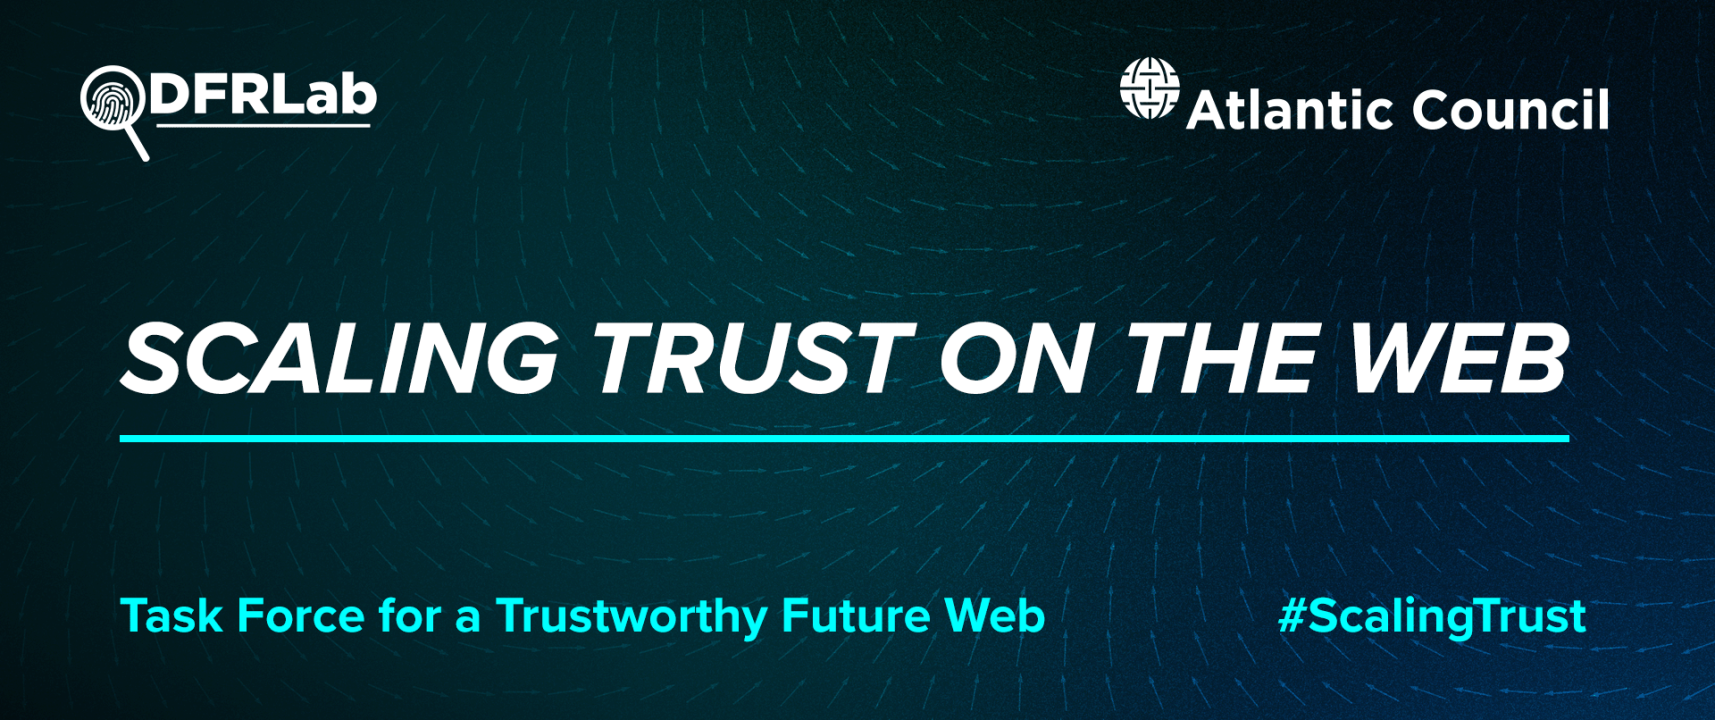 Scaling Trust on the Web